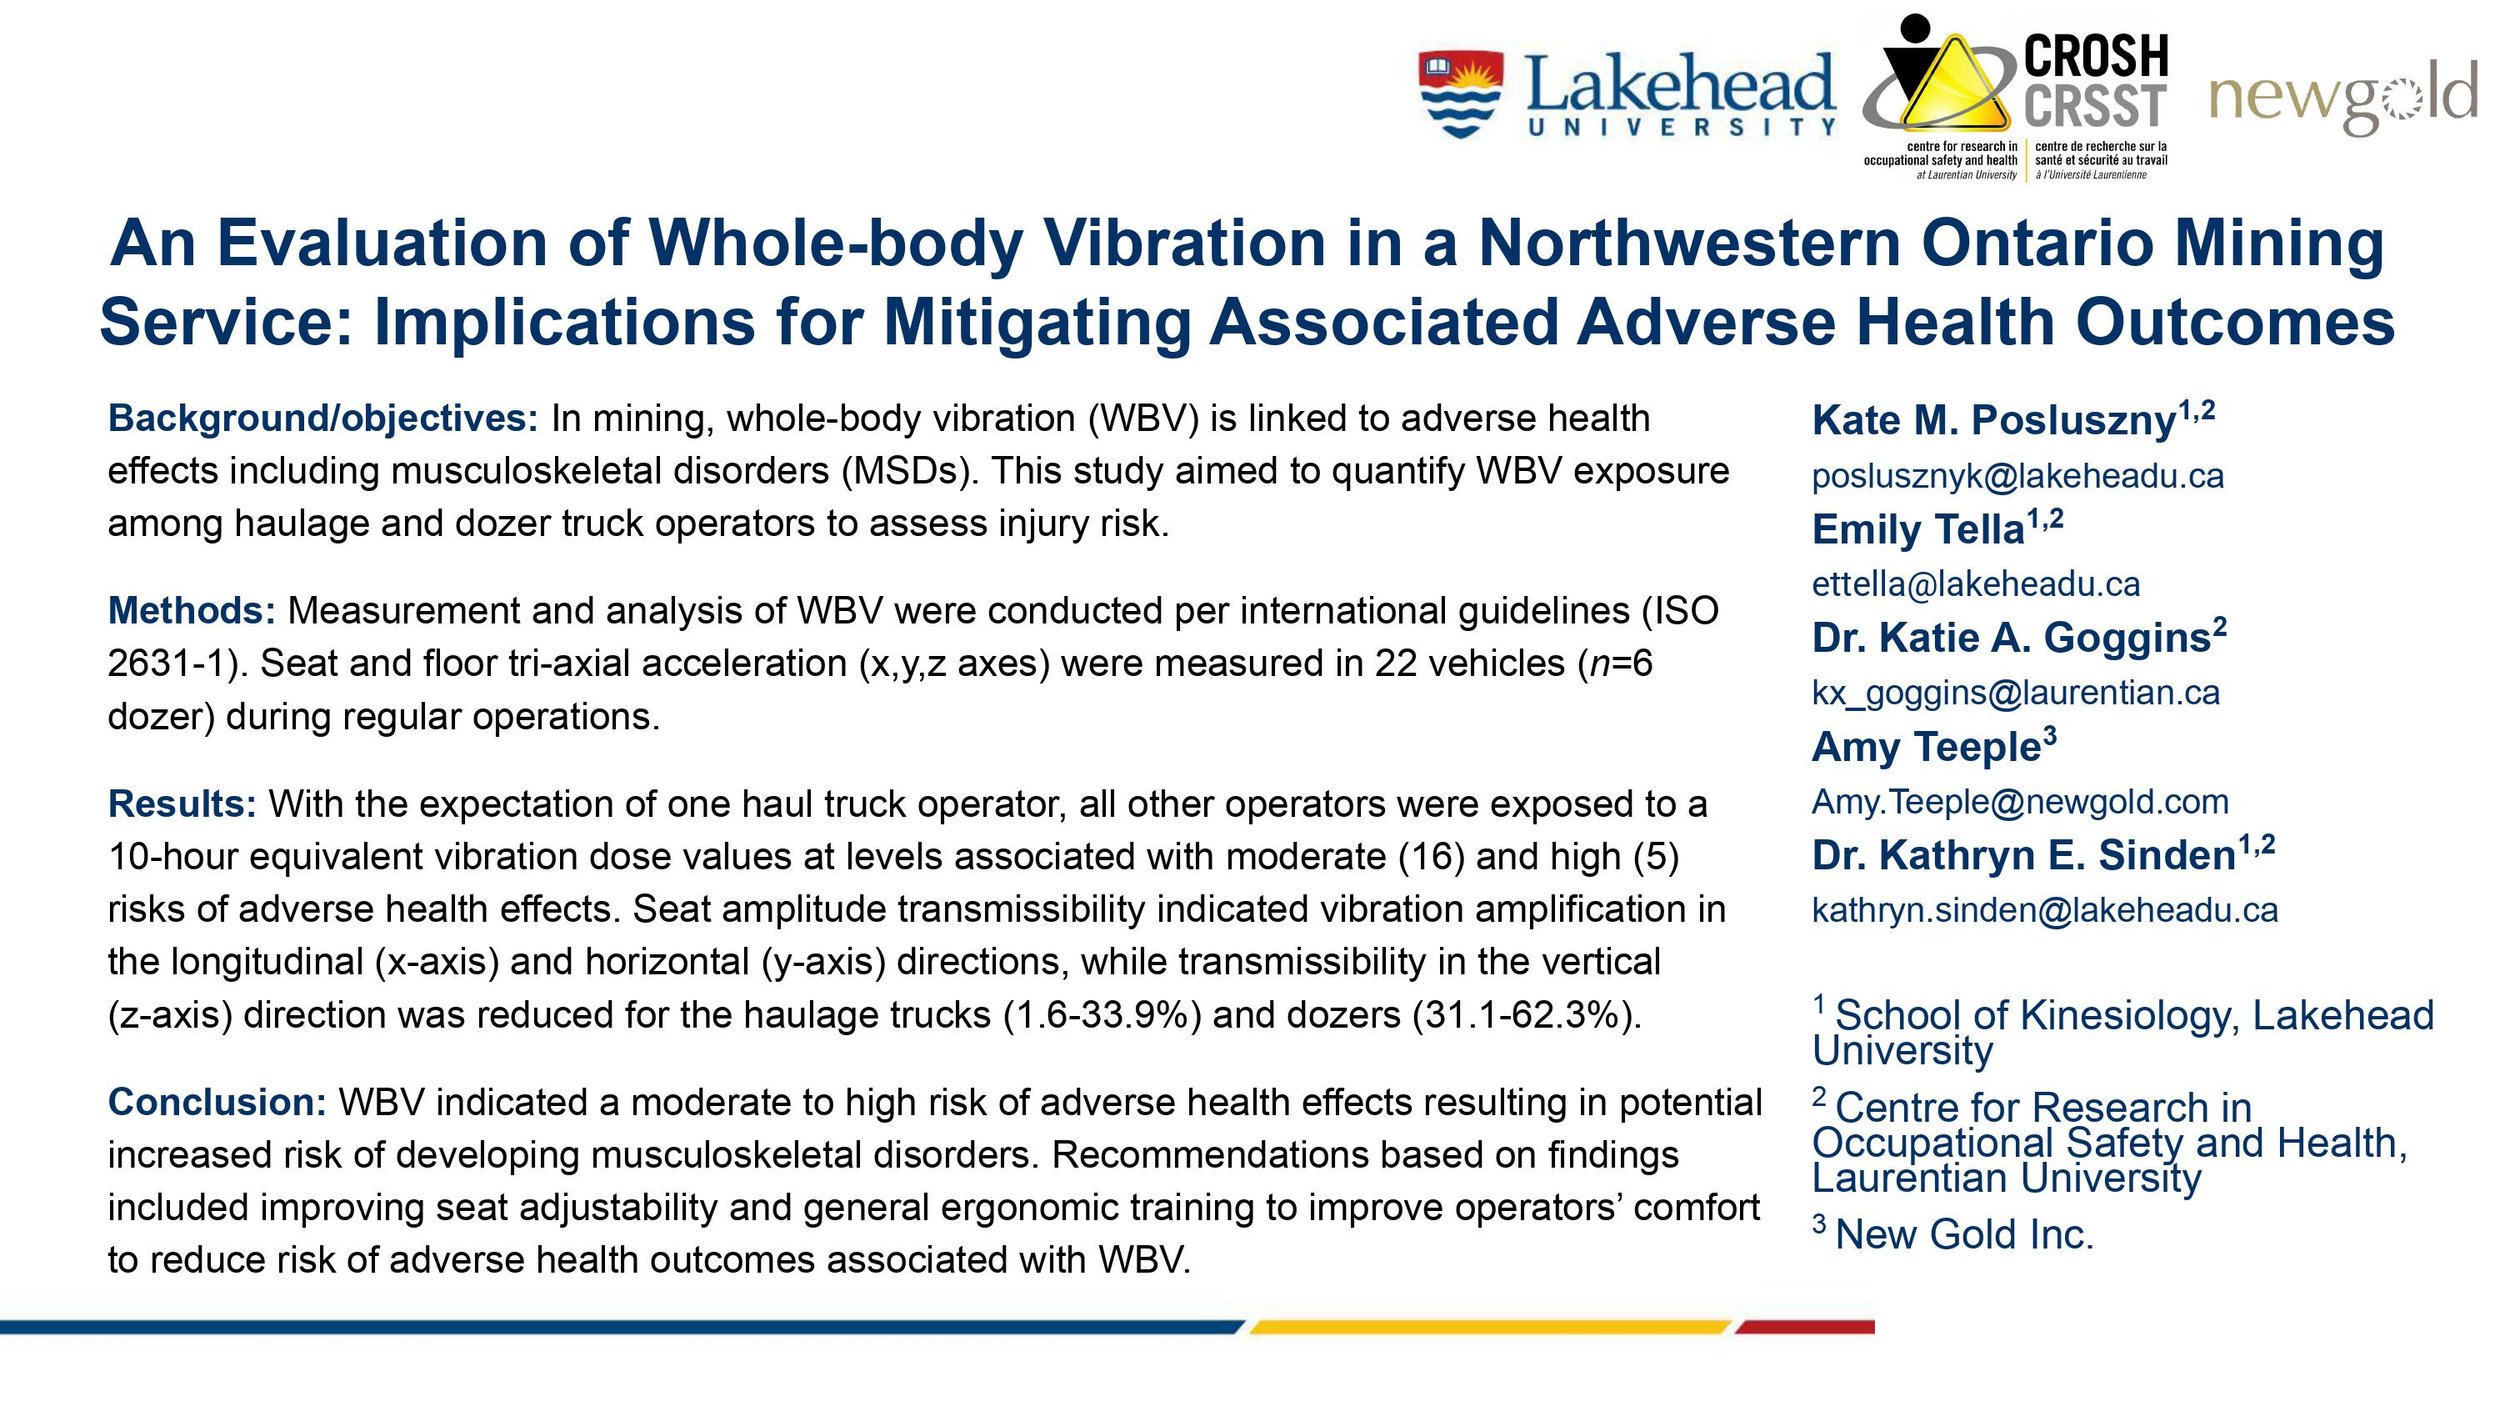 #3 An evaluation of whole-body vibration in a Northwestern Ontario mining service: Implications for mitigating associated adverse health outcomes&nbsp;